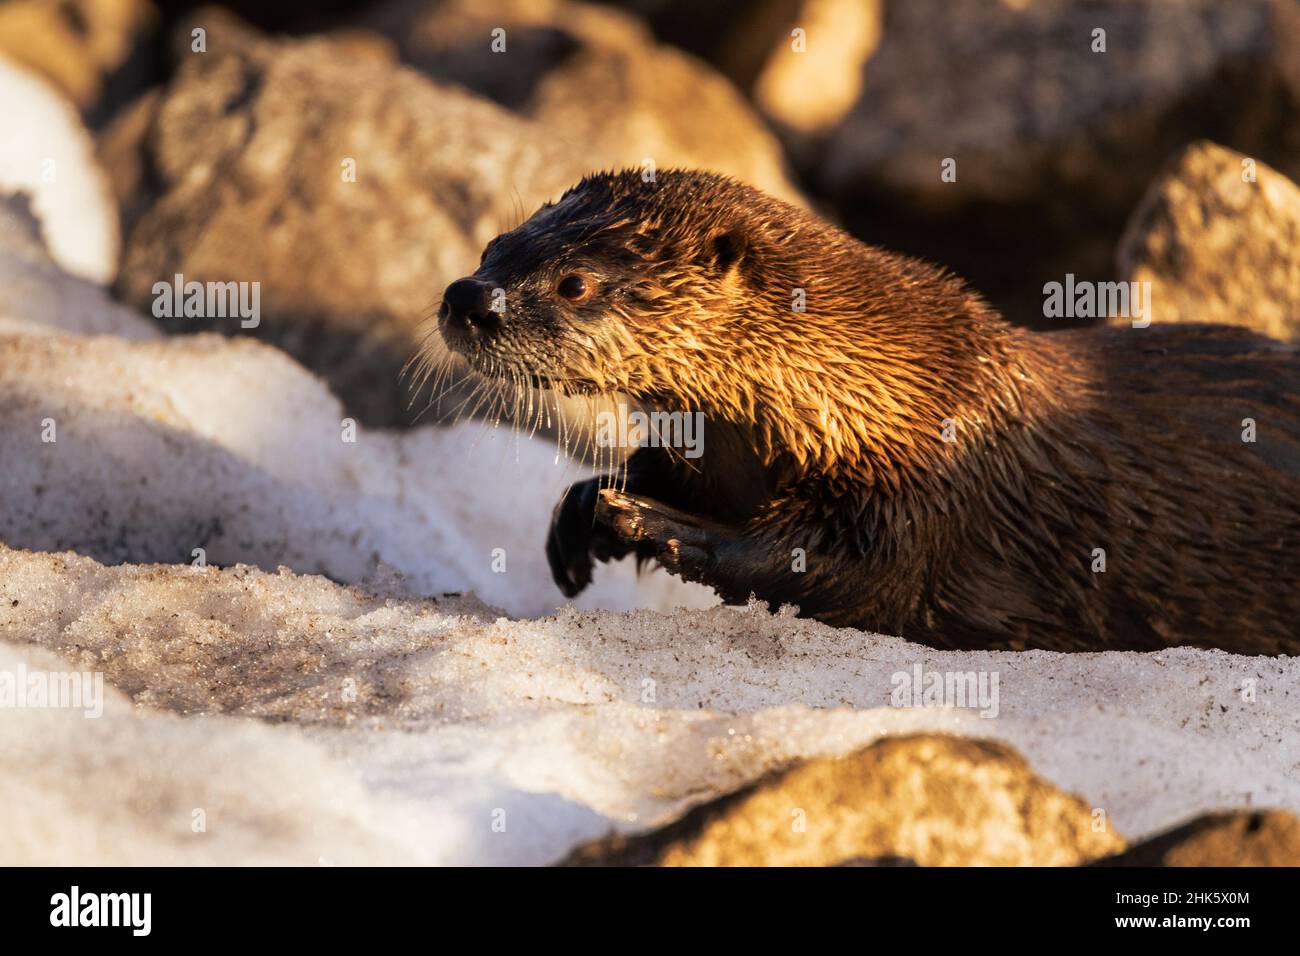 River otter (Lontra canadensis) climbing up a snowy bank.  Photographed at Lake Almanor in Plumas County, California, USA. Stock Photo